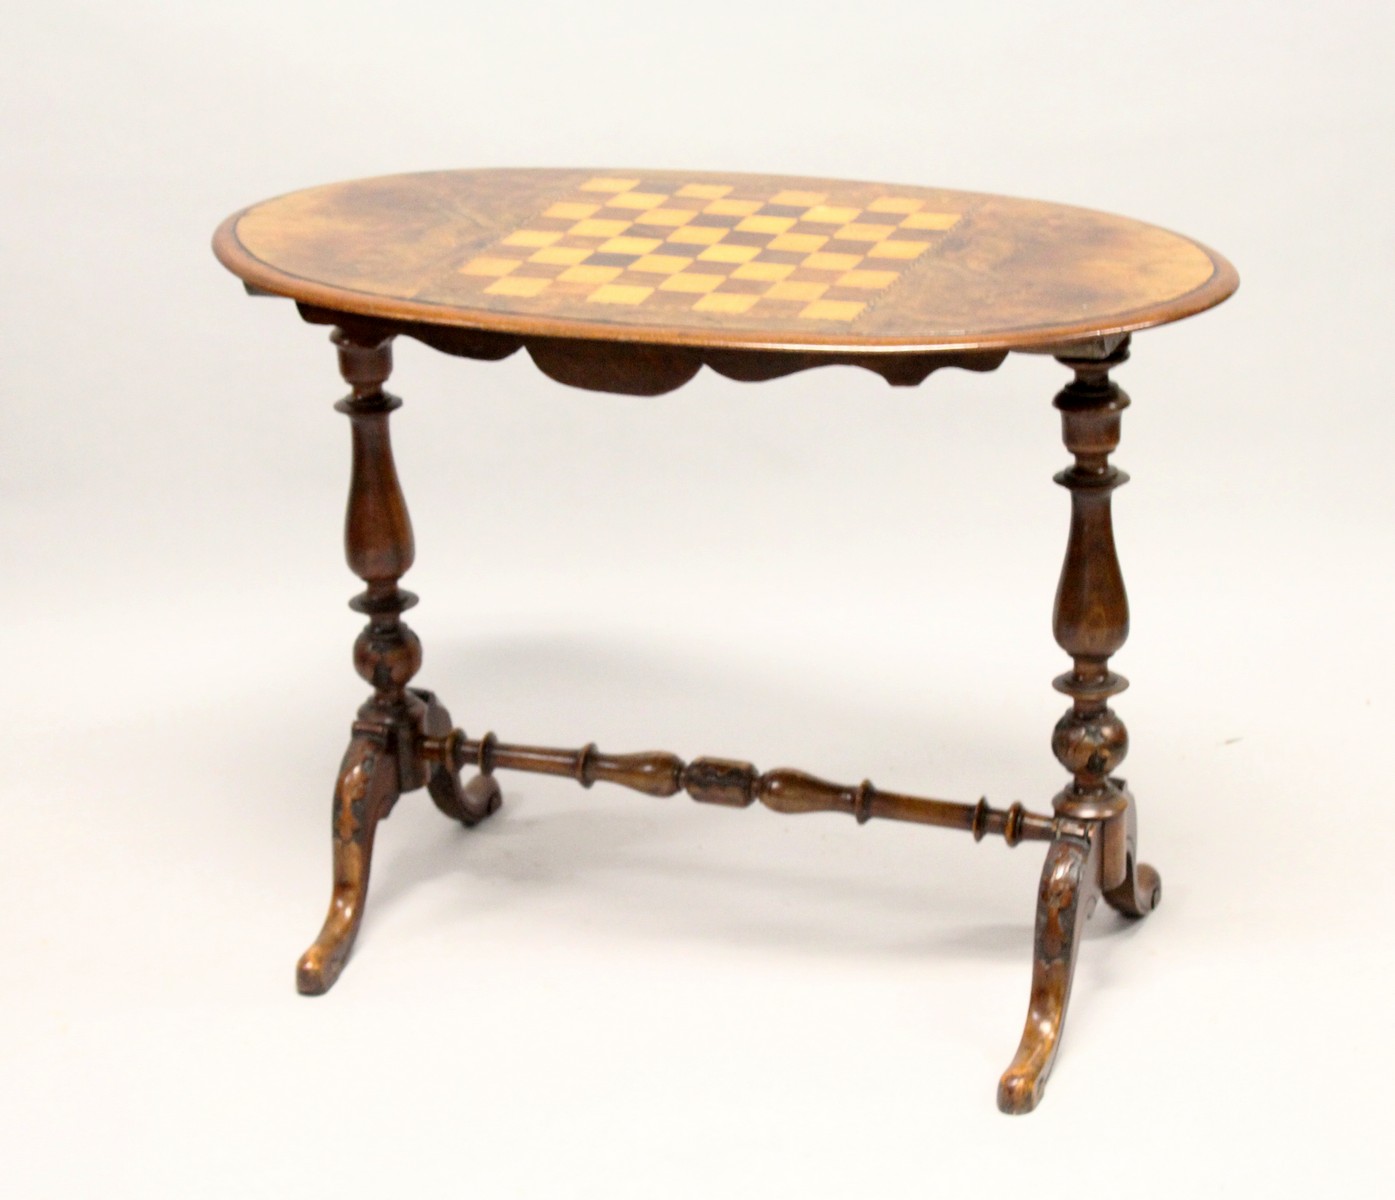 A VICTORIAN BURR WALNUT OVAL STRETCHER TABLE, the top inlaid with a games board. 3ft 1.5ins long x